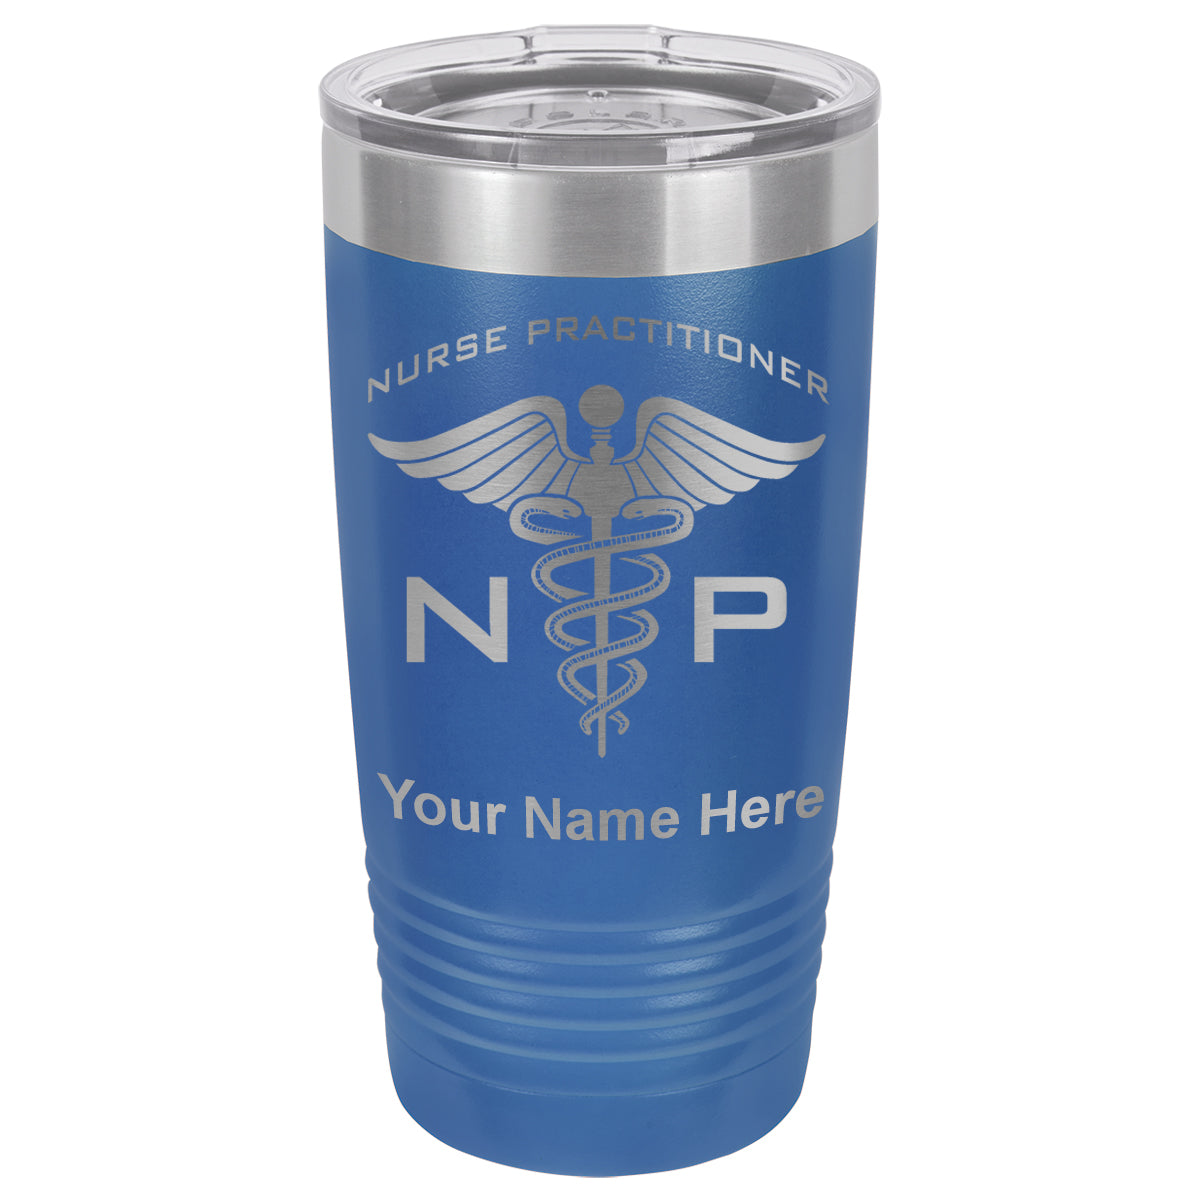 20oz Vacuum Insulated Tumbler Mug, NP Nurse Practitioner, Personalized Engraving Included